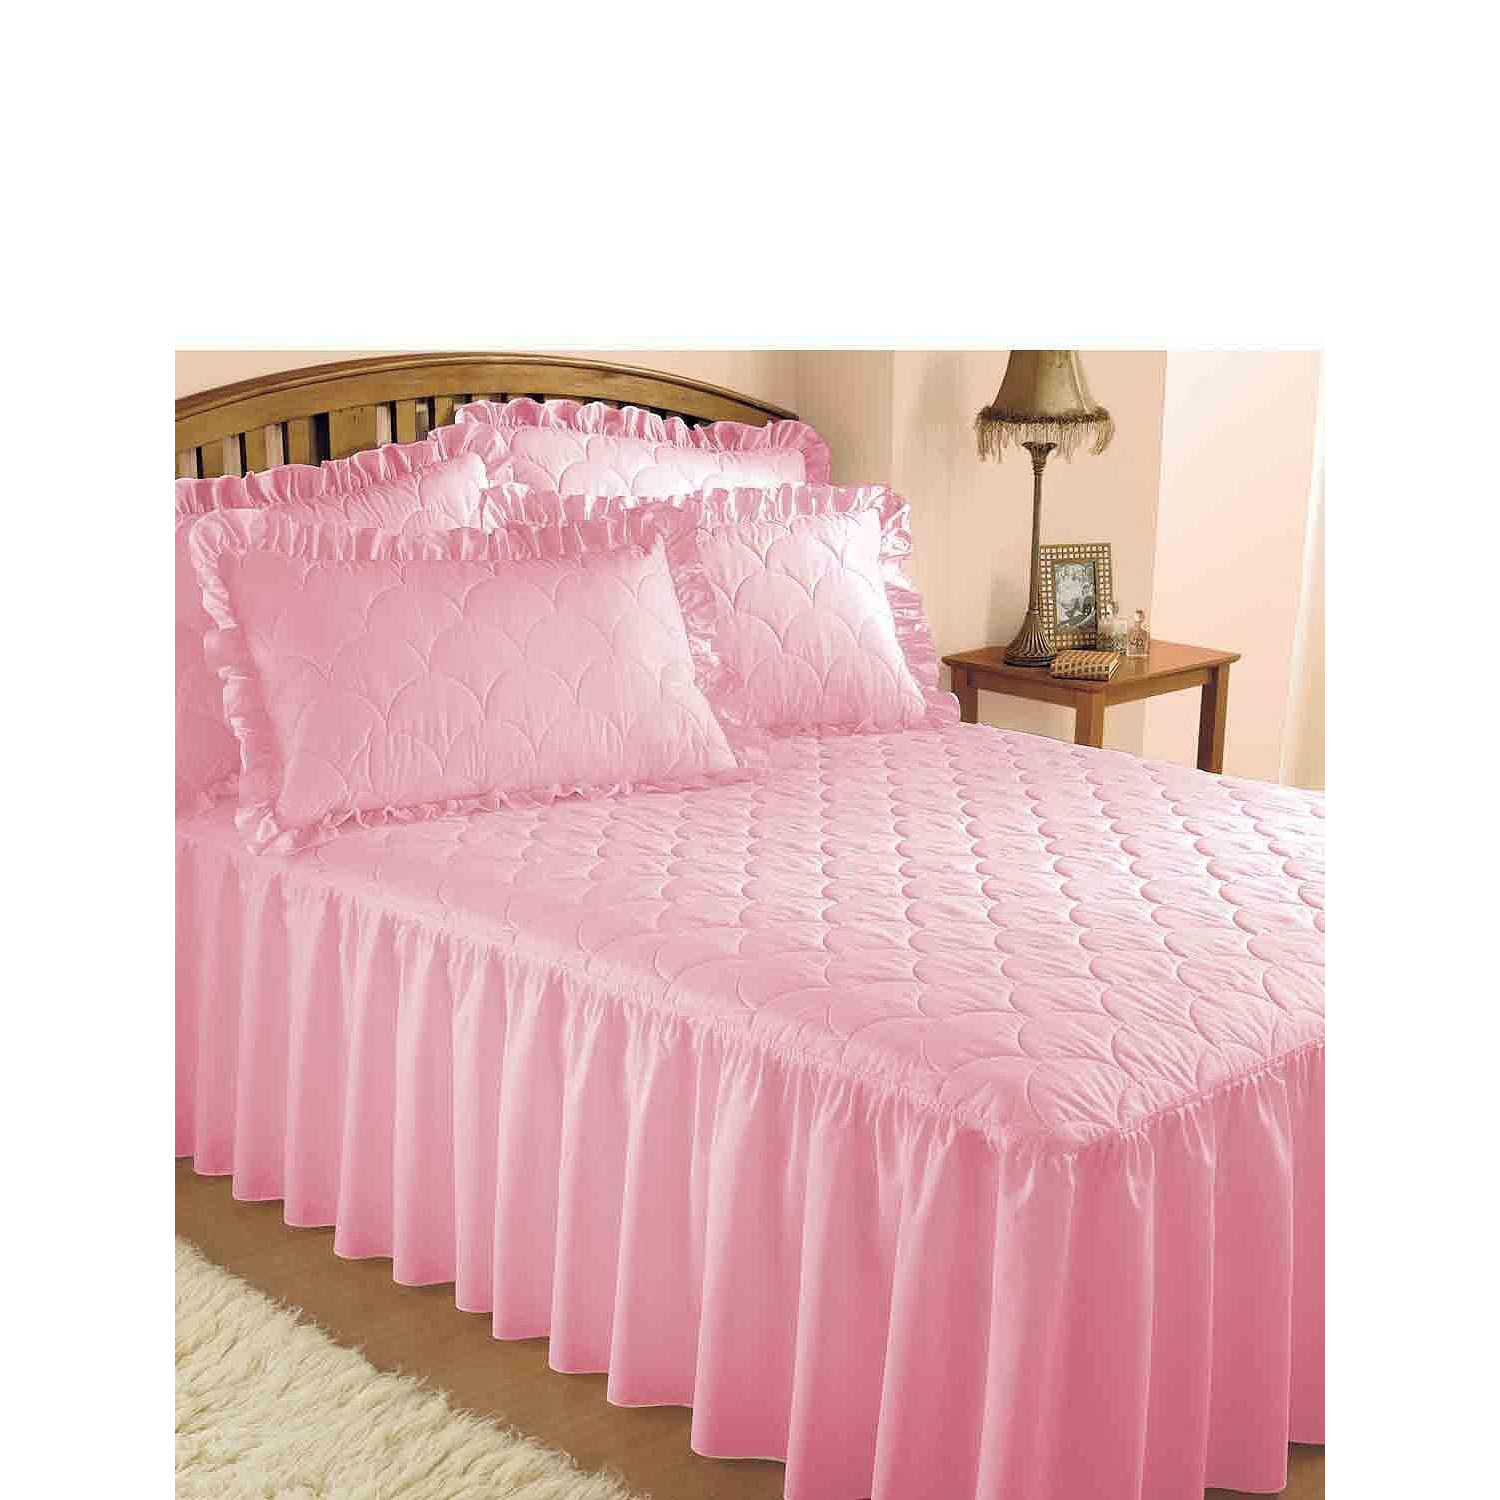 Plain Quilted Bedspread with Pillow Shams sold separately - image 1